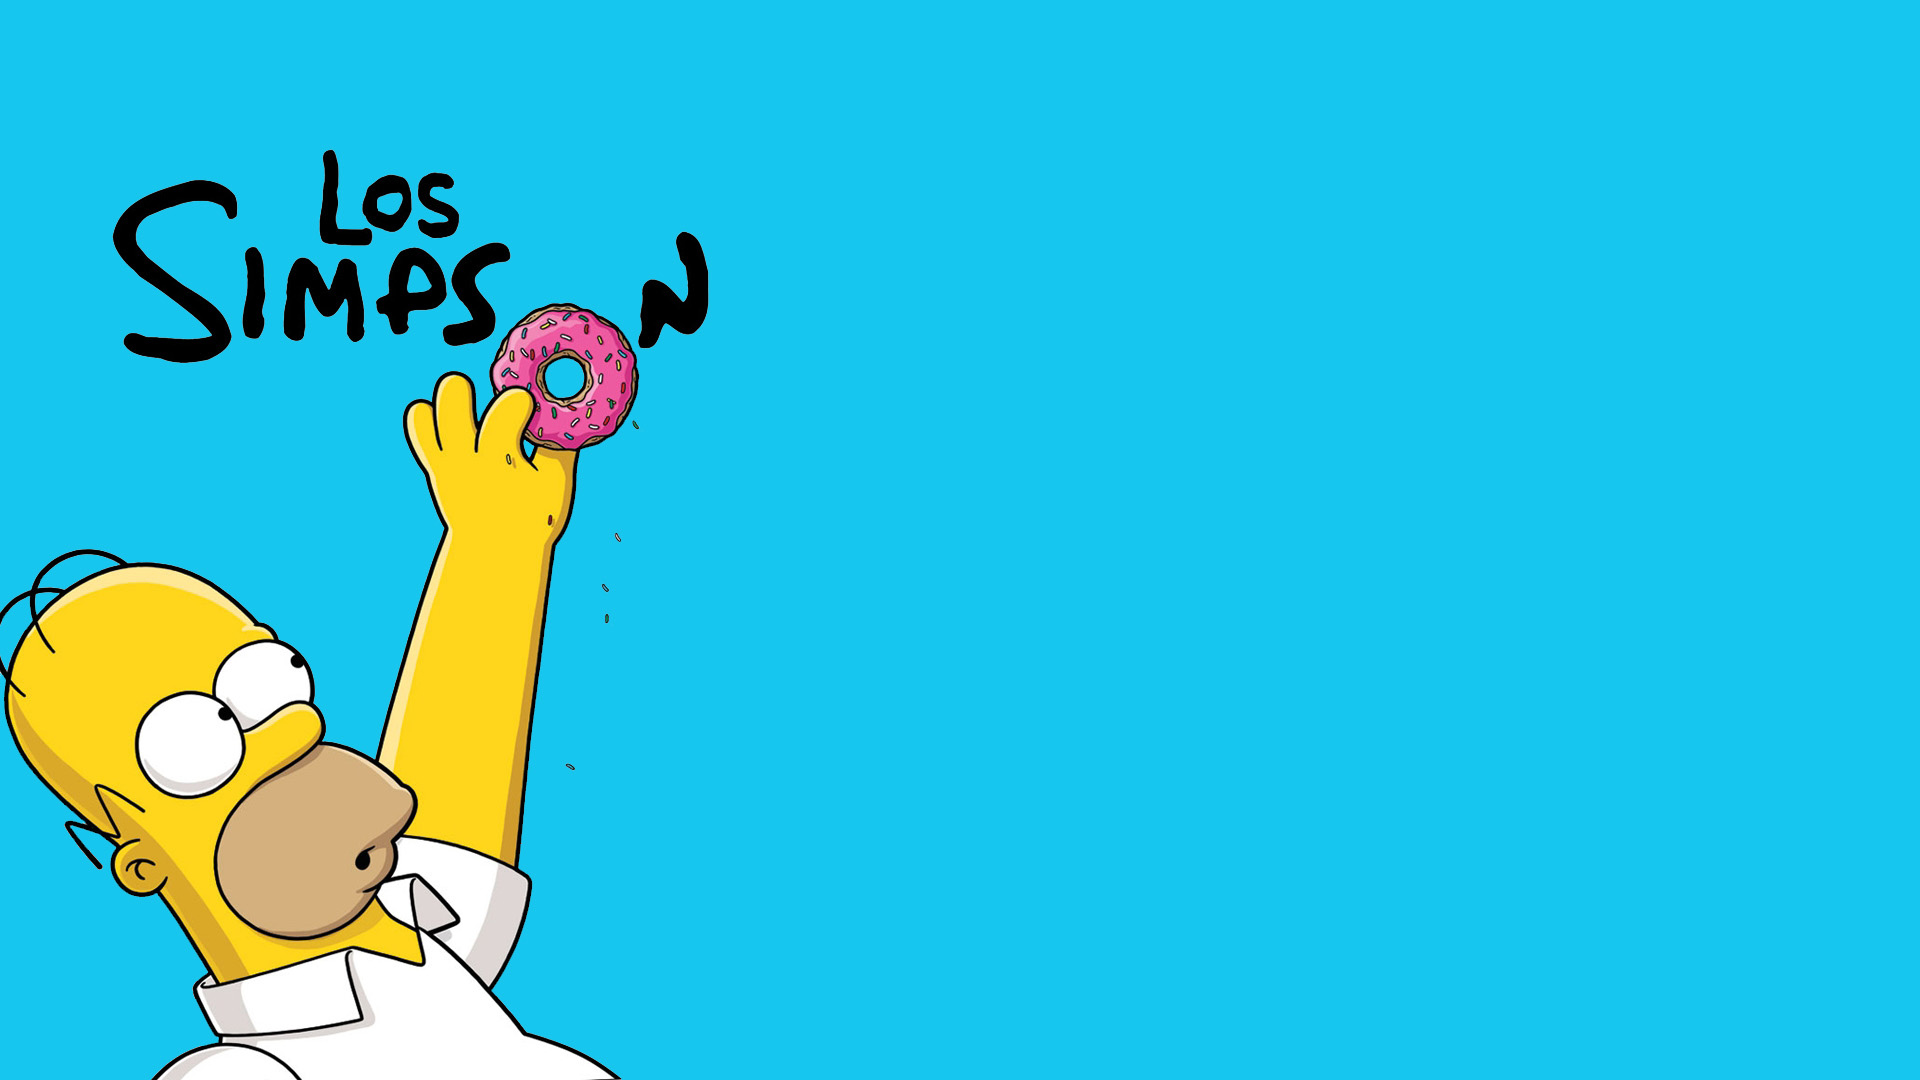 Download The Simpsons, Simpsons Wallpaper in 1920x1080 Resolution